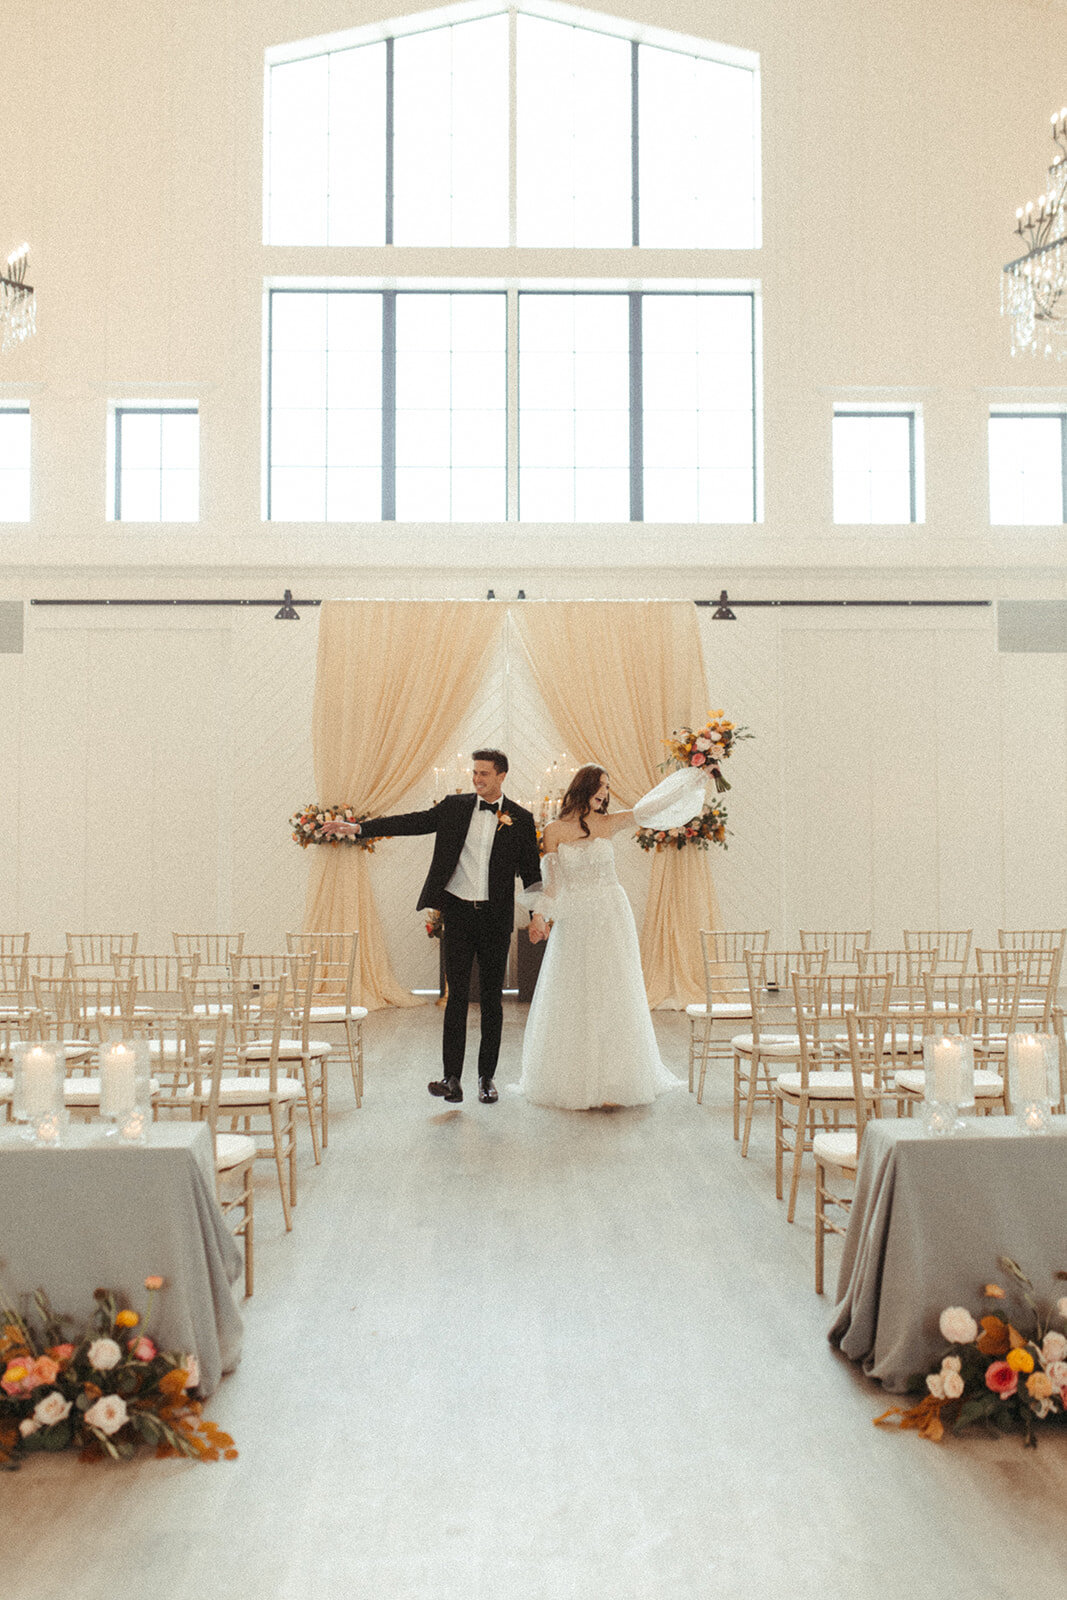 A bride and groom wearing a white wedding gown and black tuxedo walk down the aisle with excitement.